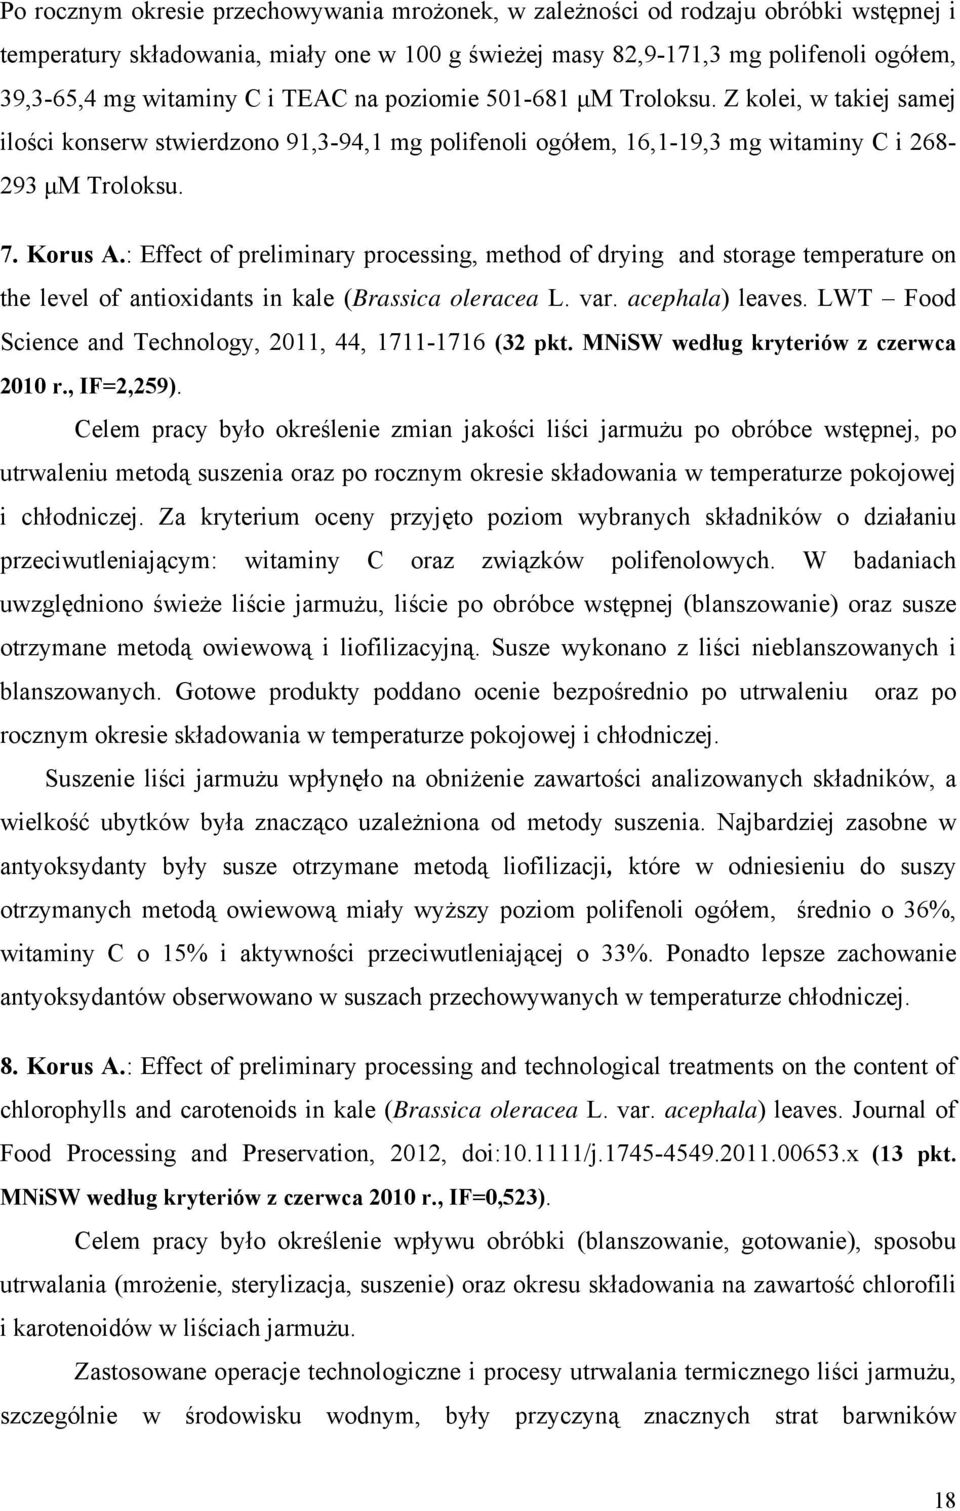 : Effect of preliminary processing, method of drying and storage temperature on the level of antioxidants in kale (Brassica oleracea L. var. acephala) leaves.